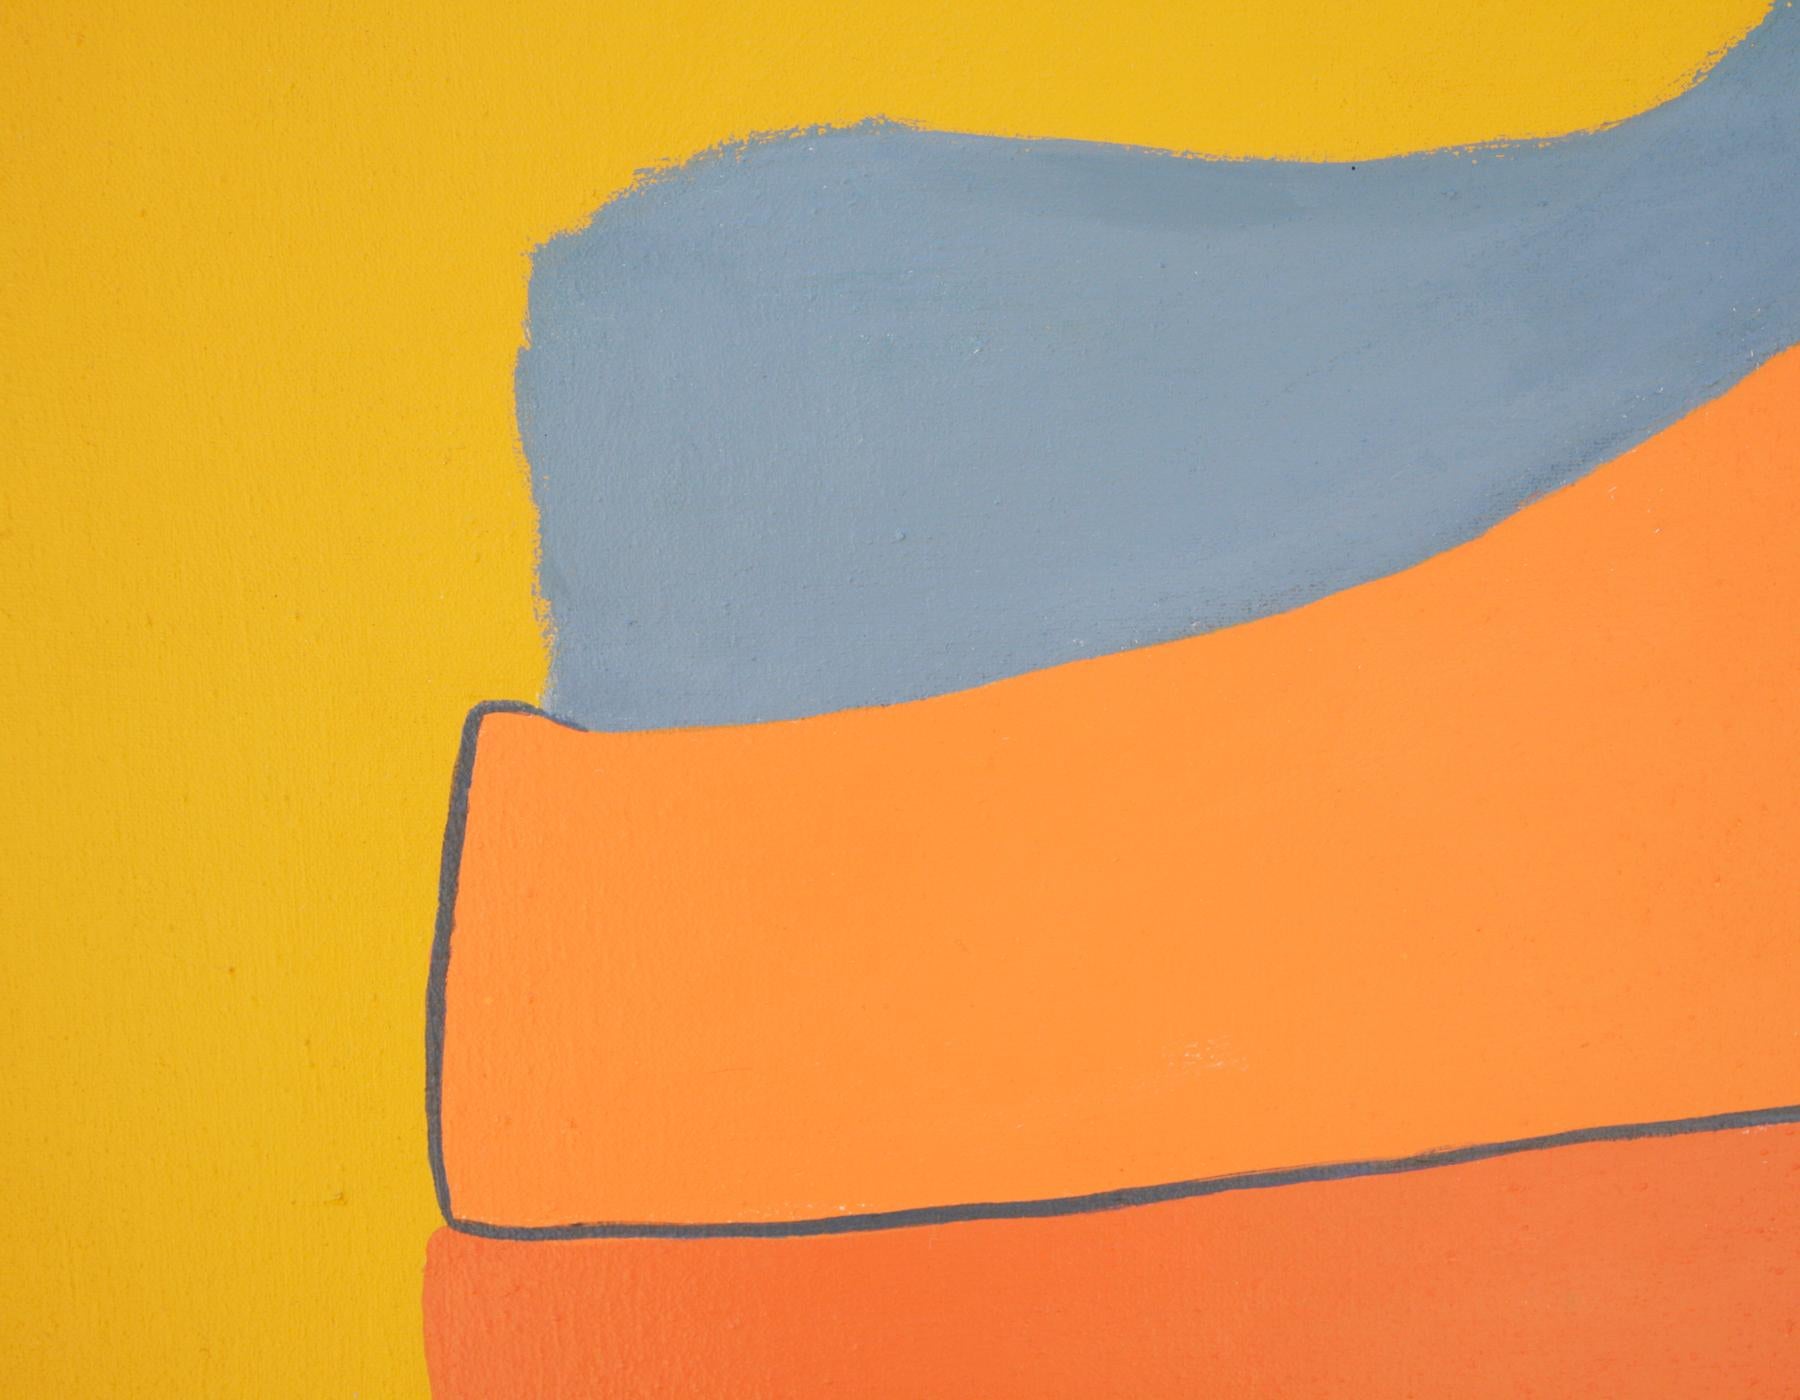 This example is a true minimalist wonder with great balance and flow of color. Her works of art done from the late 1960s to early 1980s reflect a purity of vision and affinity for color and movement.